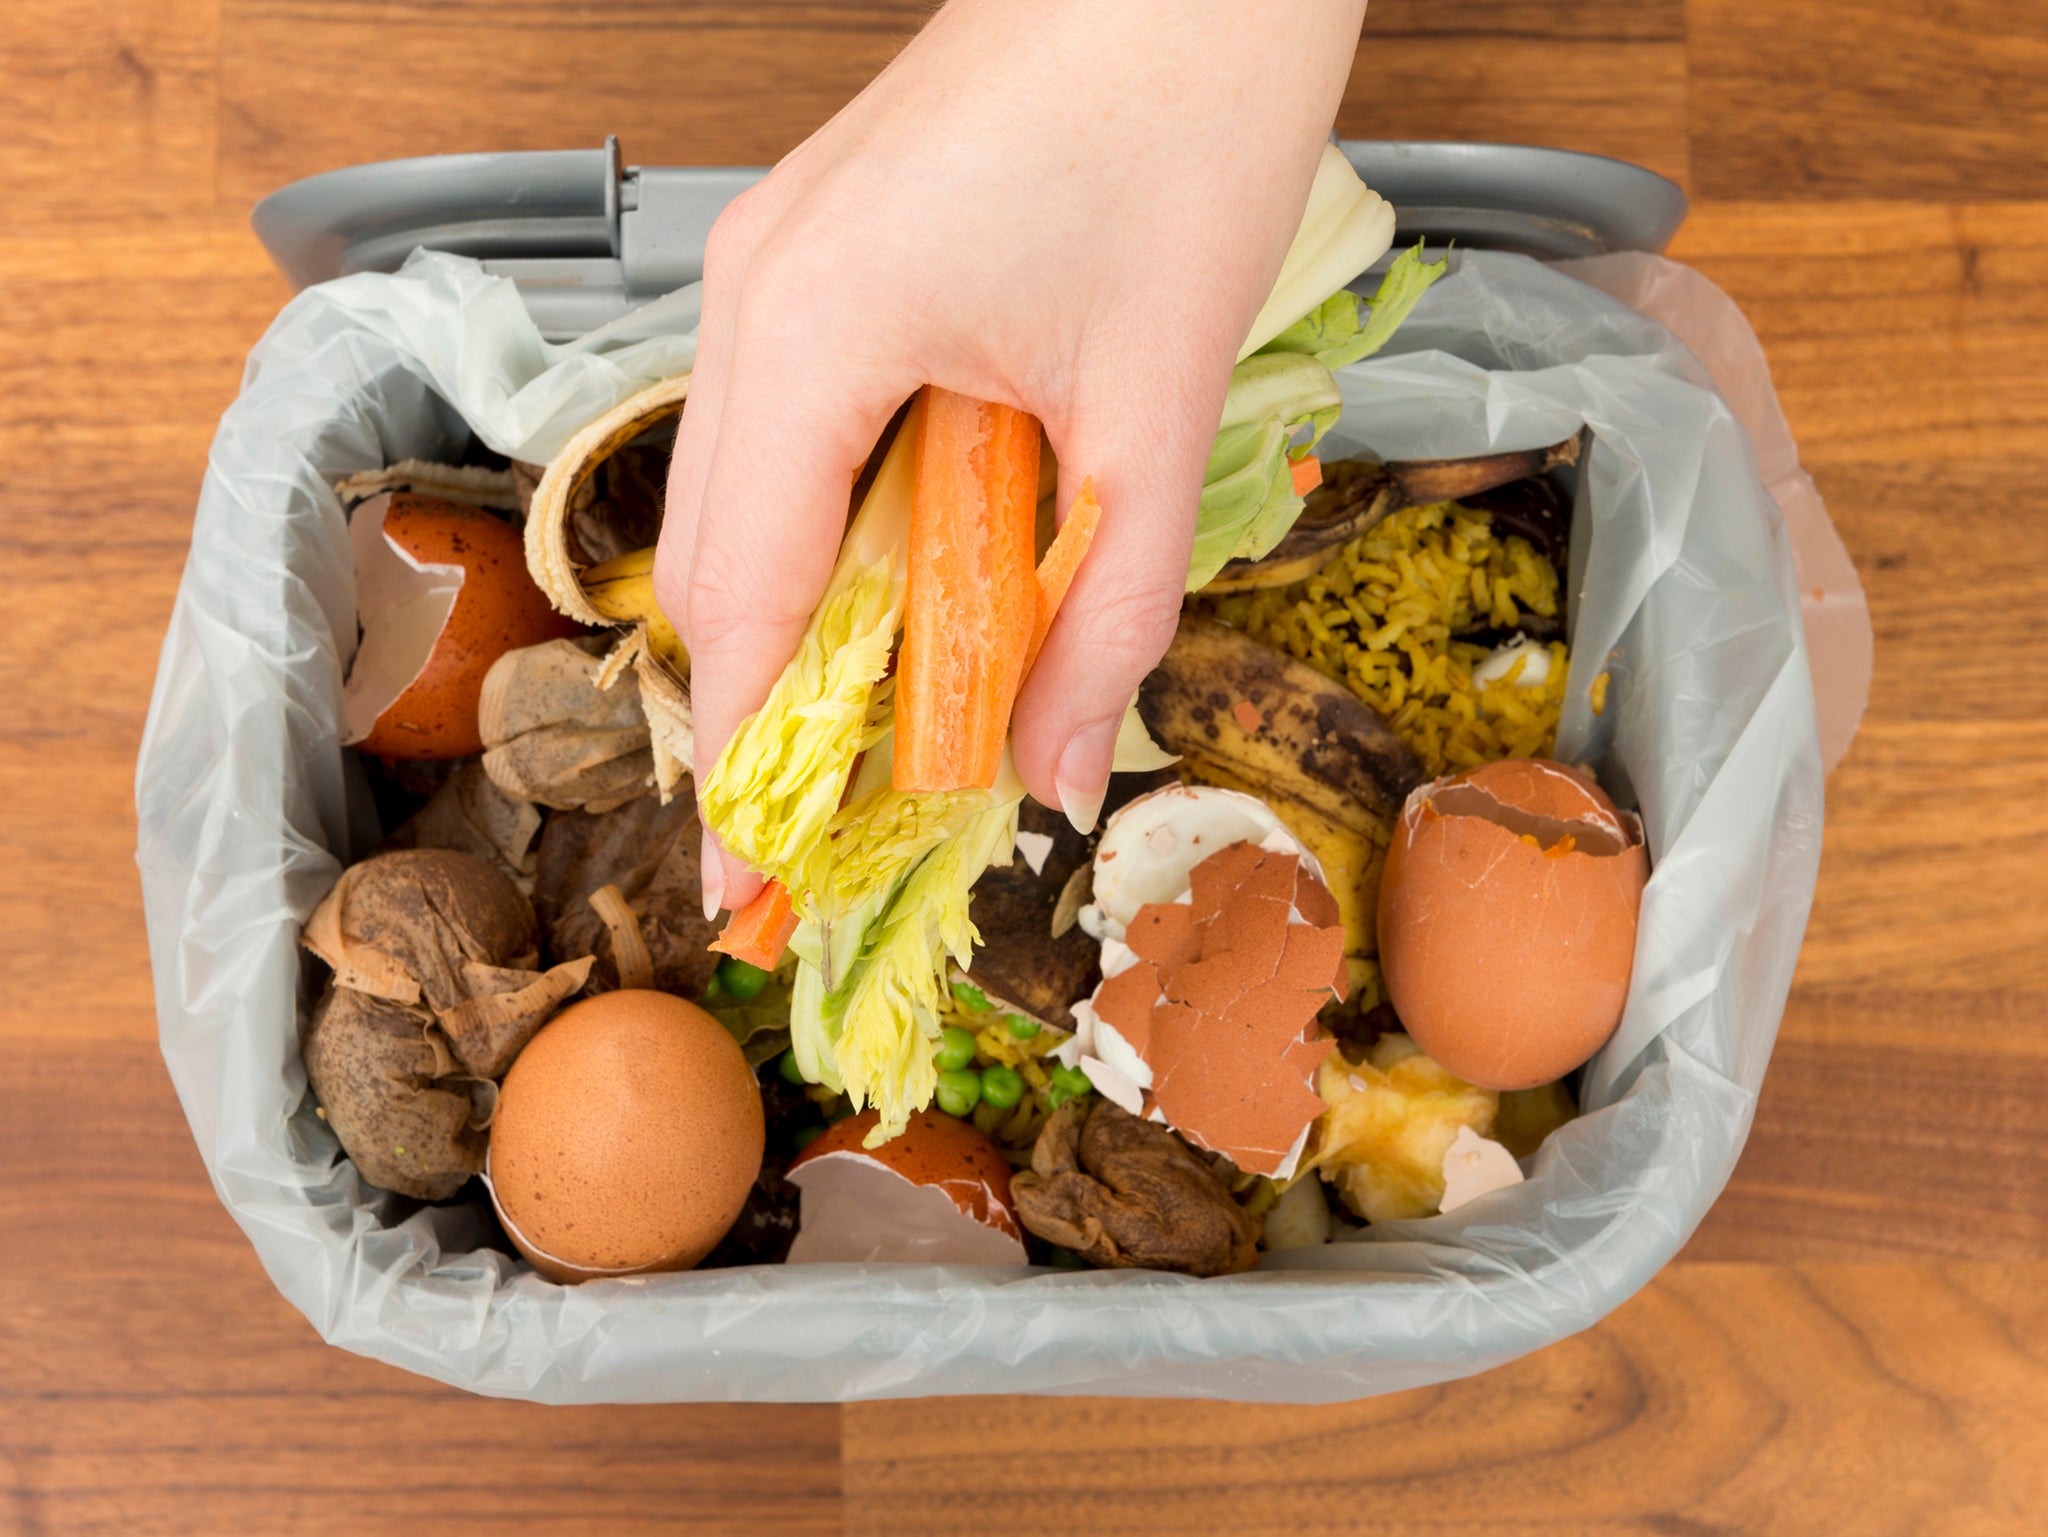 In present day, food waste is presented in secular terms as an affront to environmental sustainability